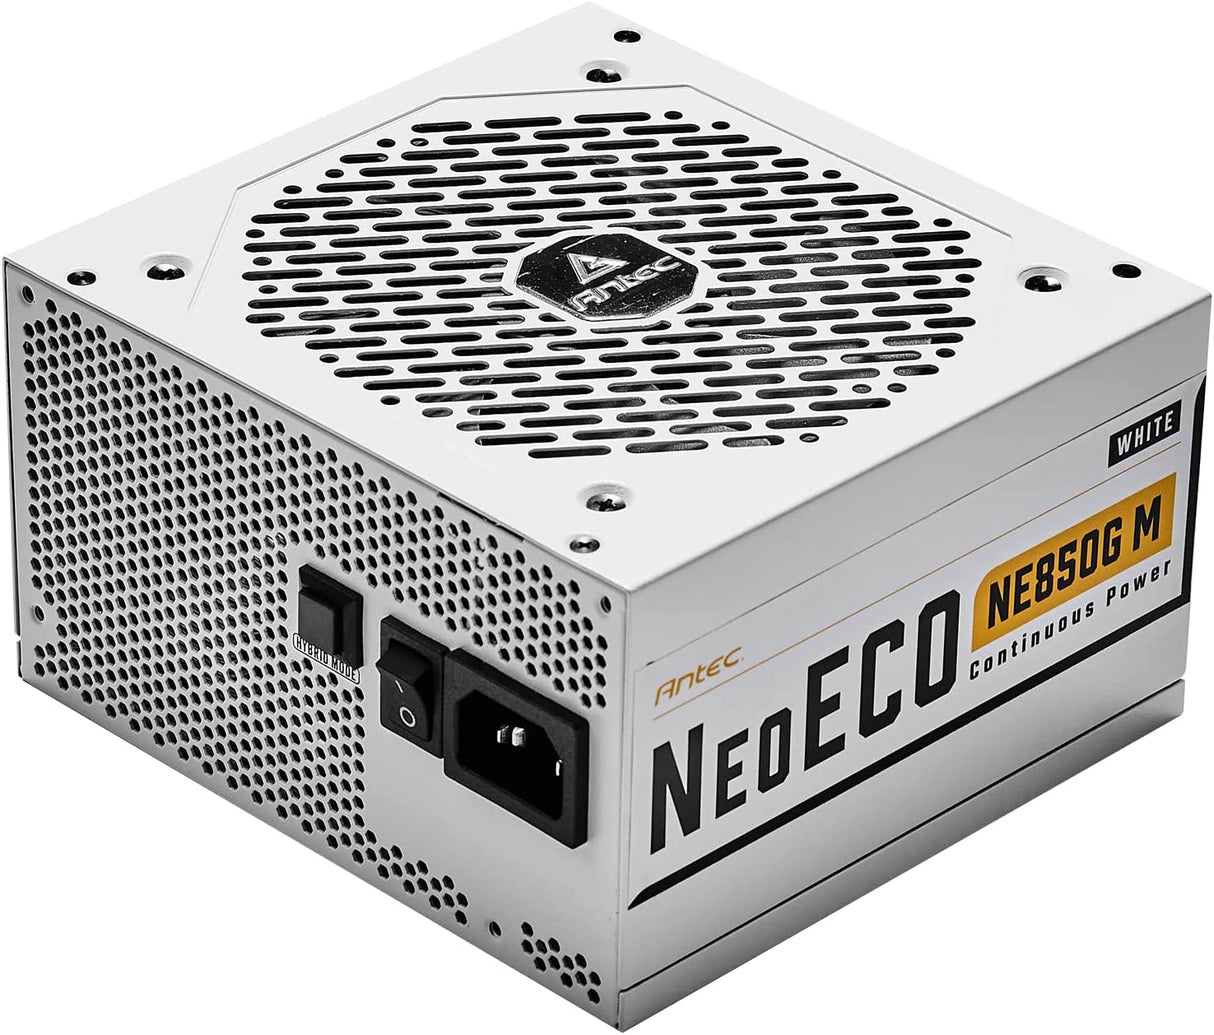 Antec NeoECO Series NE850G M White, 80 Plus Gold Certified, 850W Full Modular with PhaseWave Design, Japanese Caps, Zero RPM Manager, 120 mm Silent Fan, ATX 12V 2.4 &amp; 7-Year Warranty